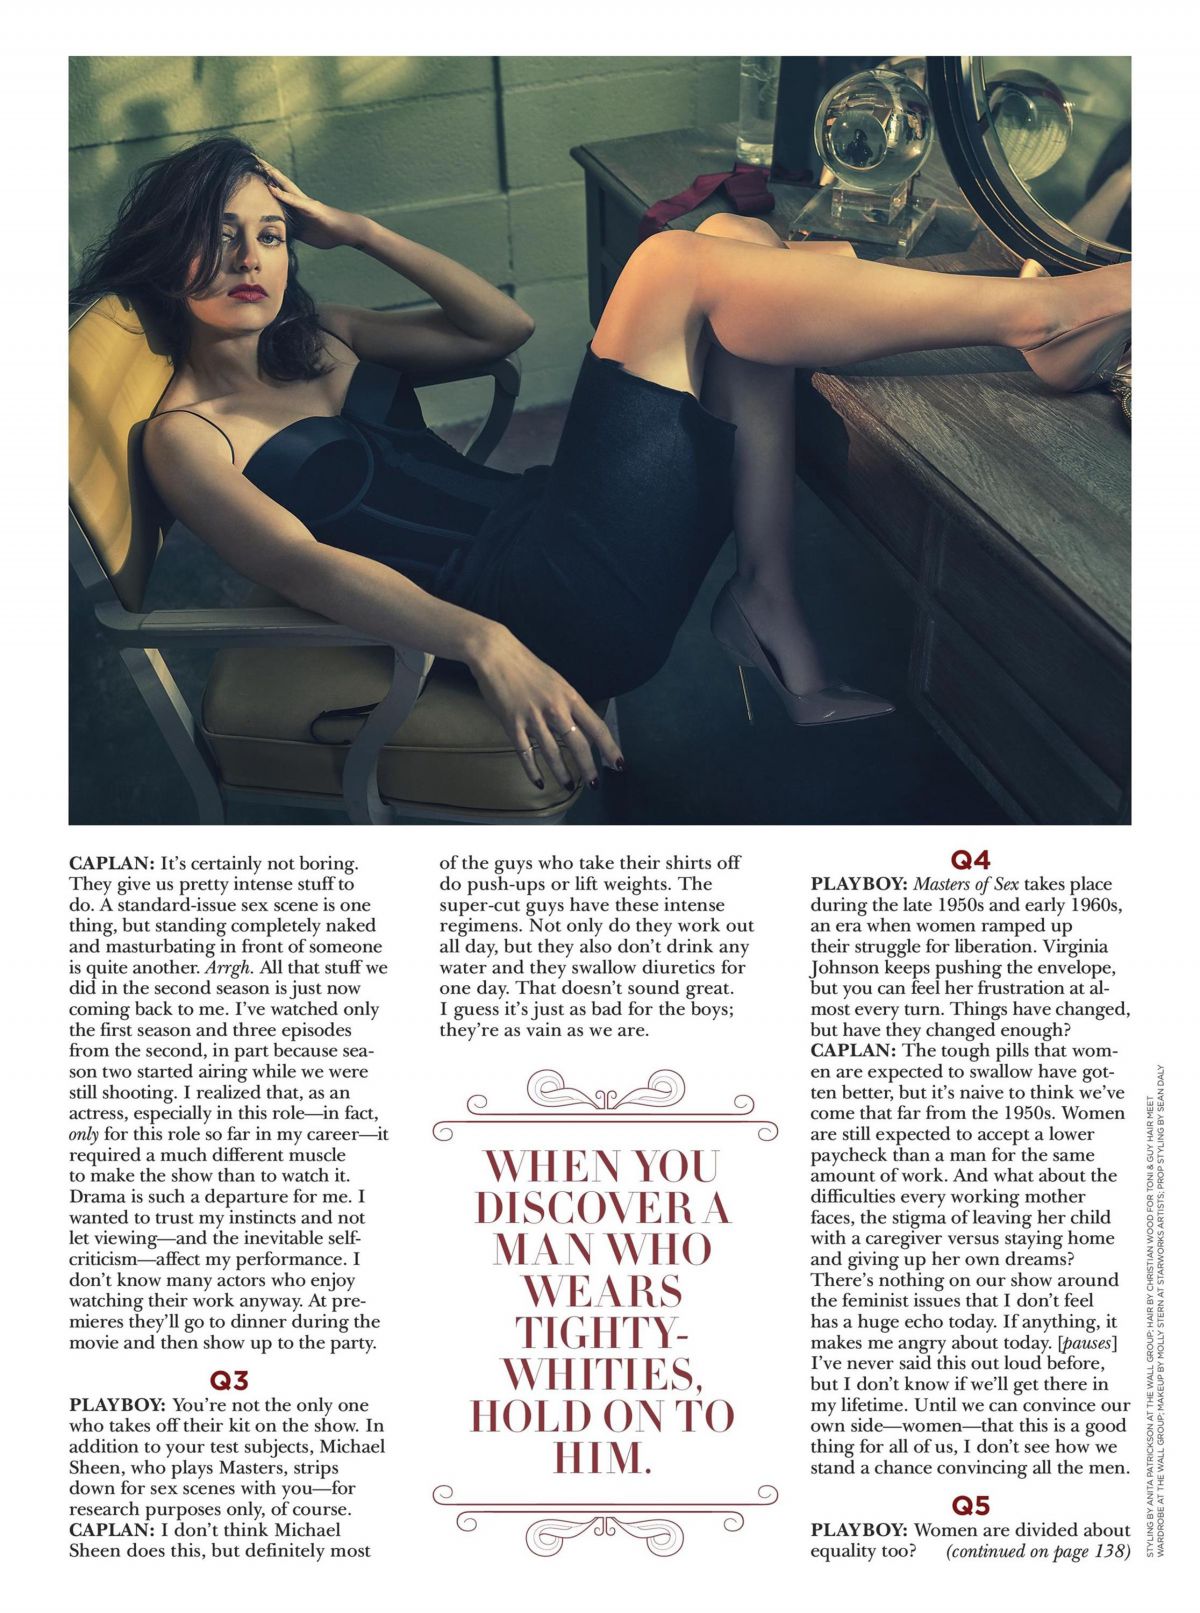 LIZZY CAPLAN in Playboy Magazine, July/August 2015 Issue ...